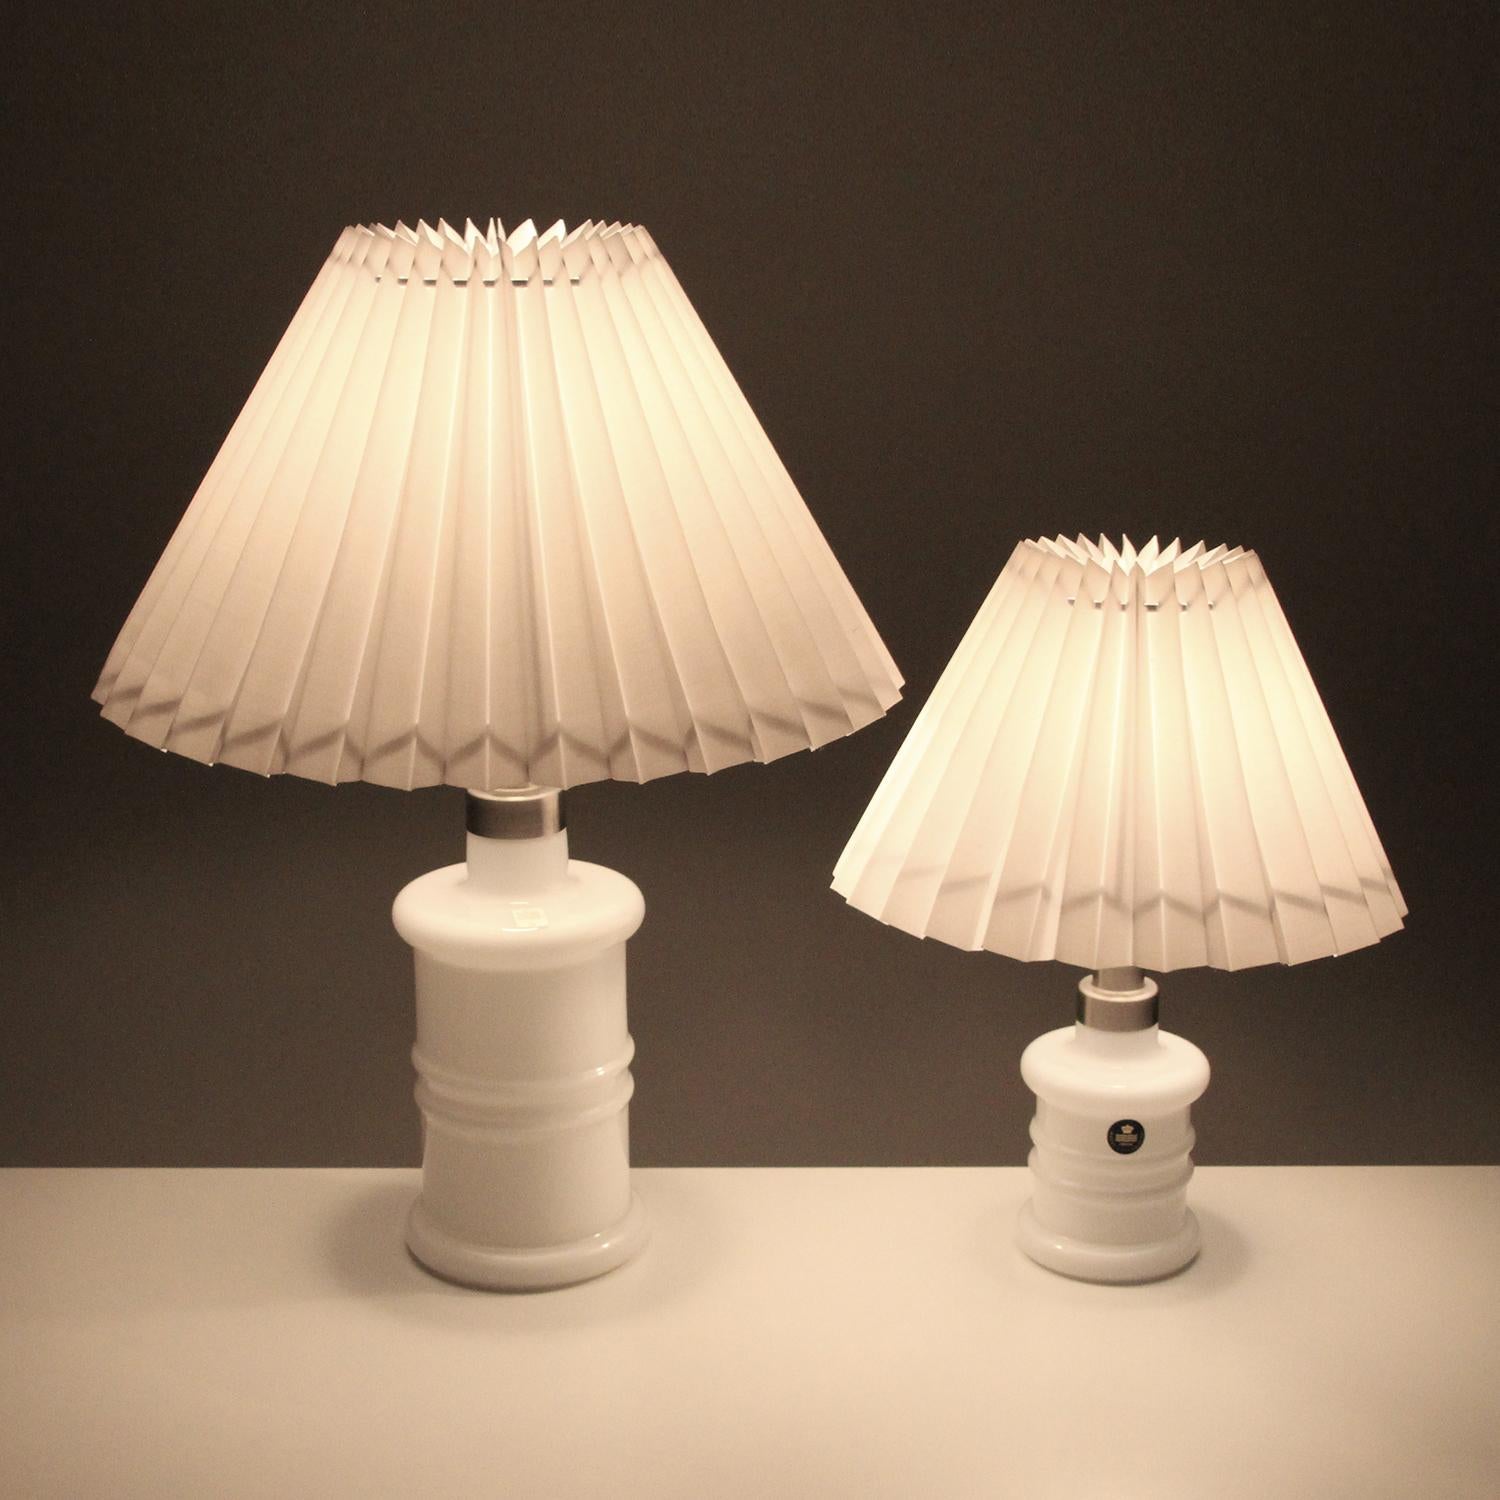 Late 20th Century Apoteker Table Lamps 'Set' by Sidse Werner for Holmegaard, 1981, New Shades Incl